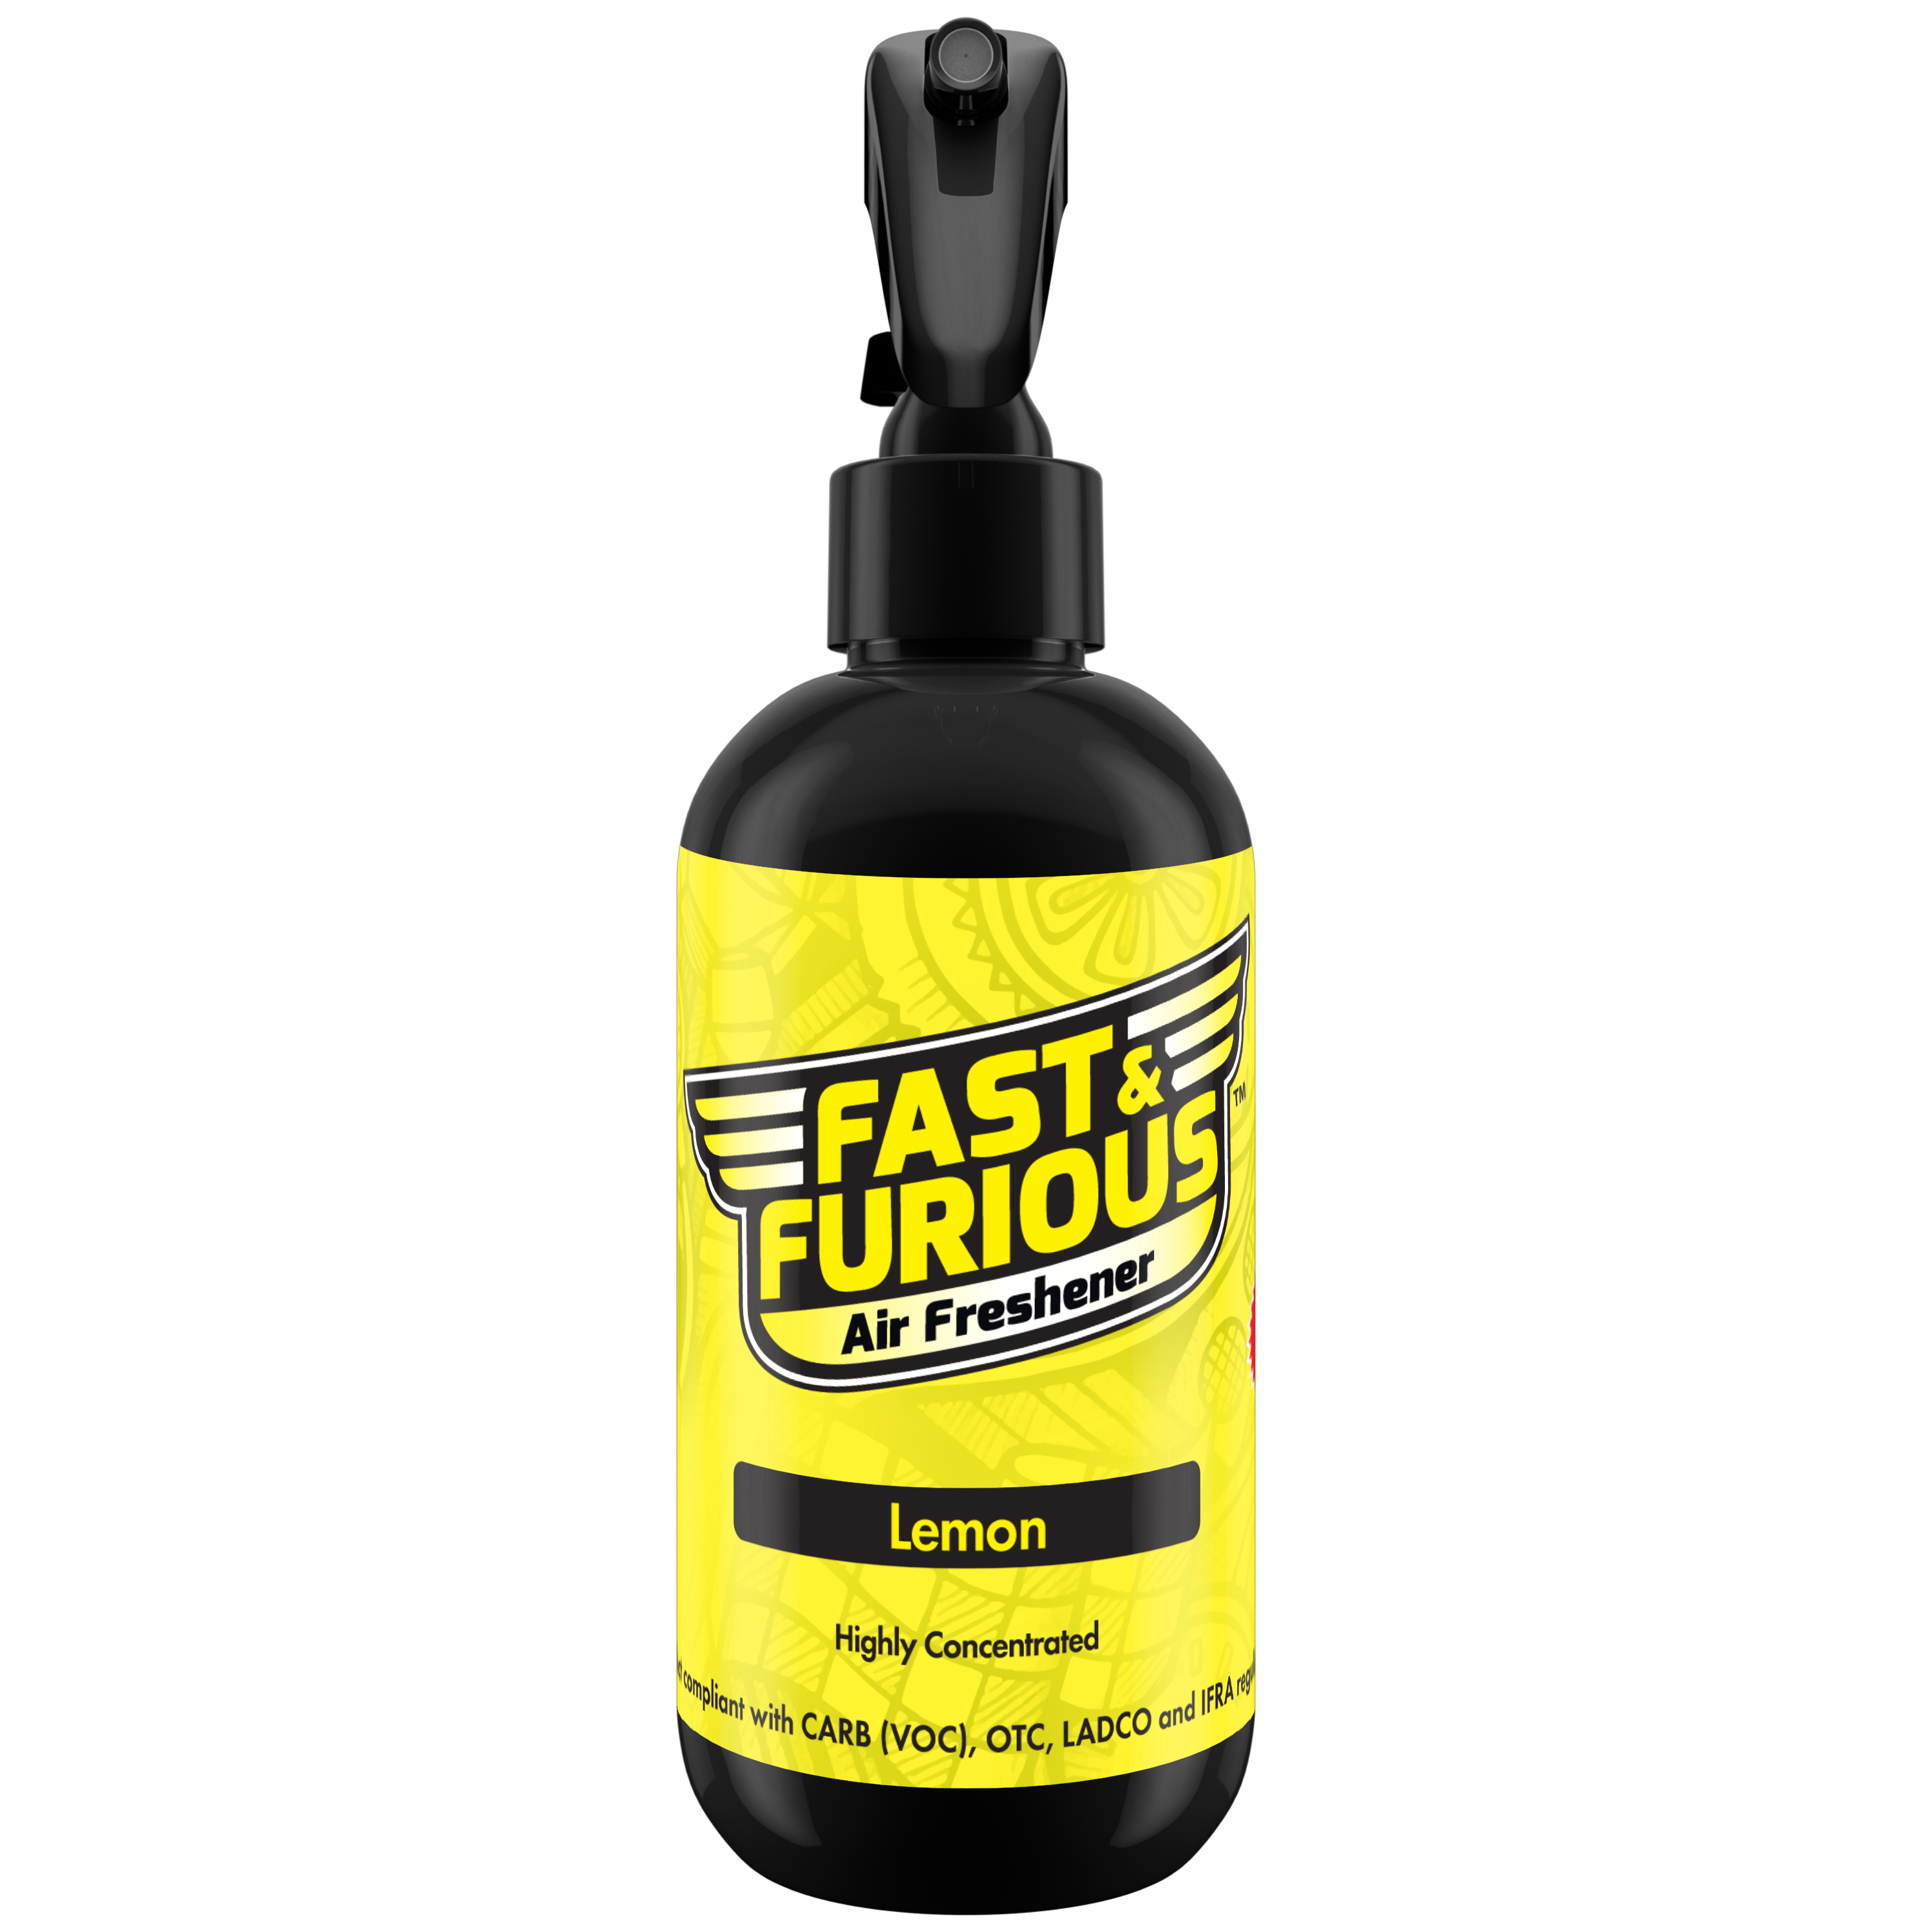 Fast and Furious Air Freshener - Lemon Scent